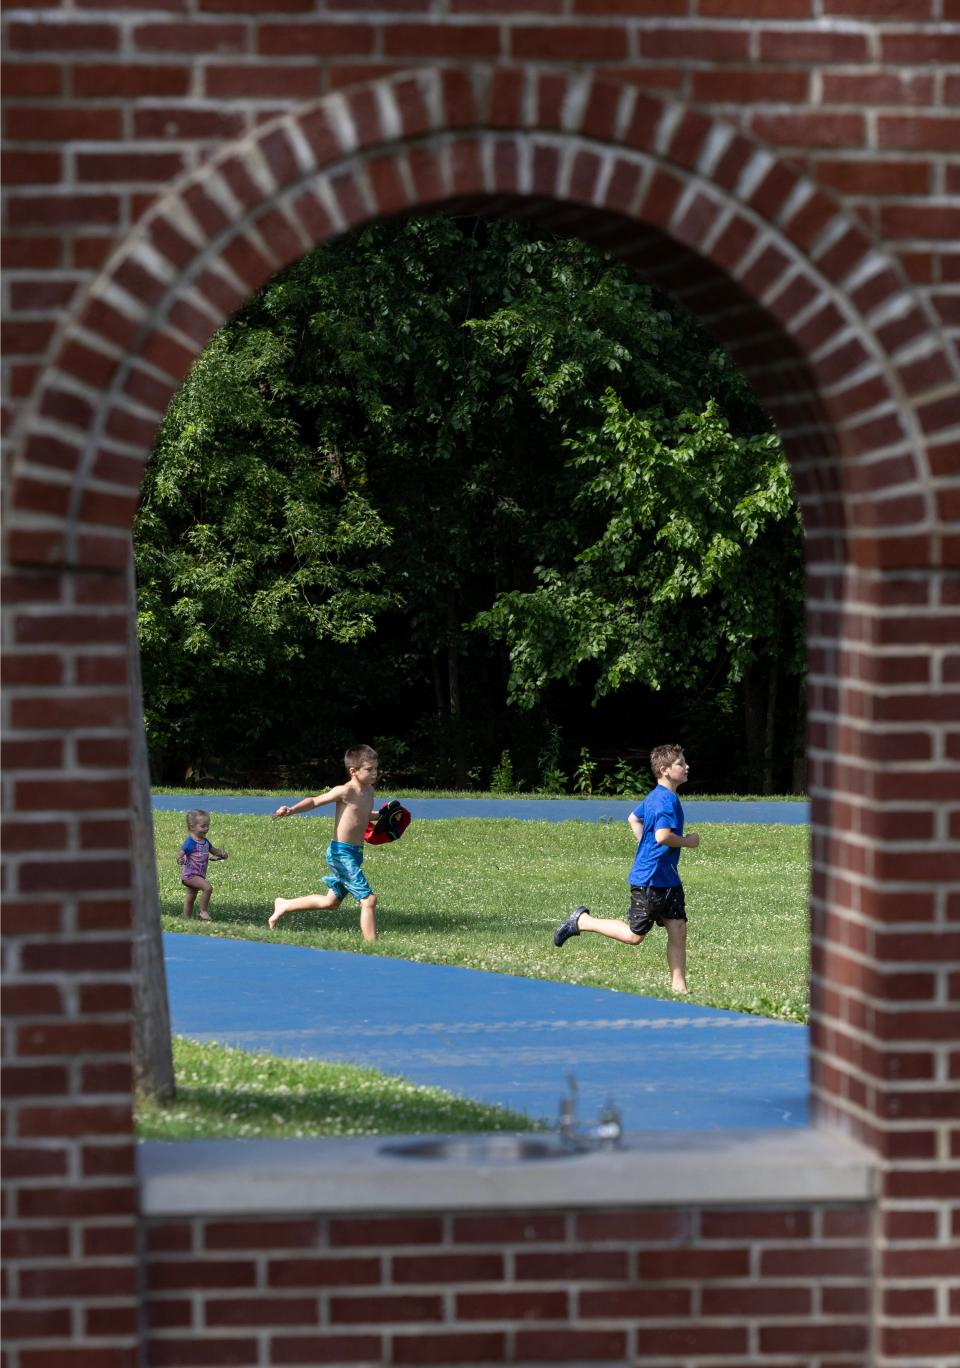 Children play last week at Reservoir Park in Massillon. The city is seeking community input on its new parks master plan and will hold a public meeting Tuesday to gather feedback.